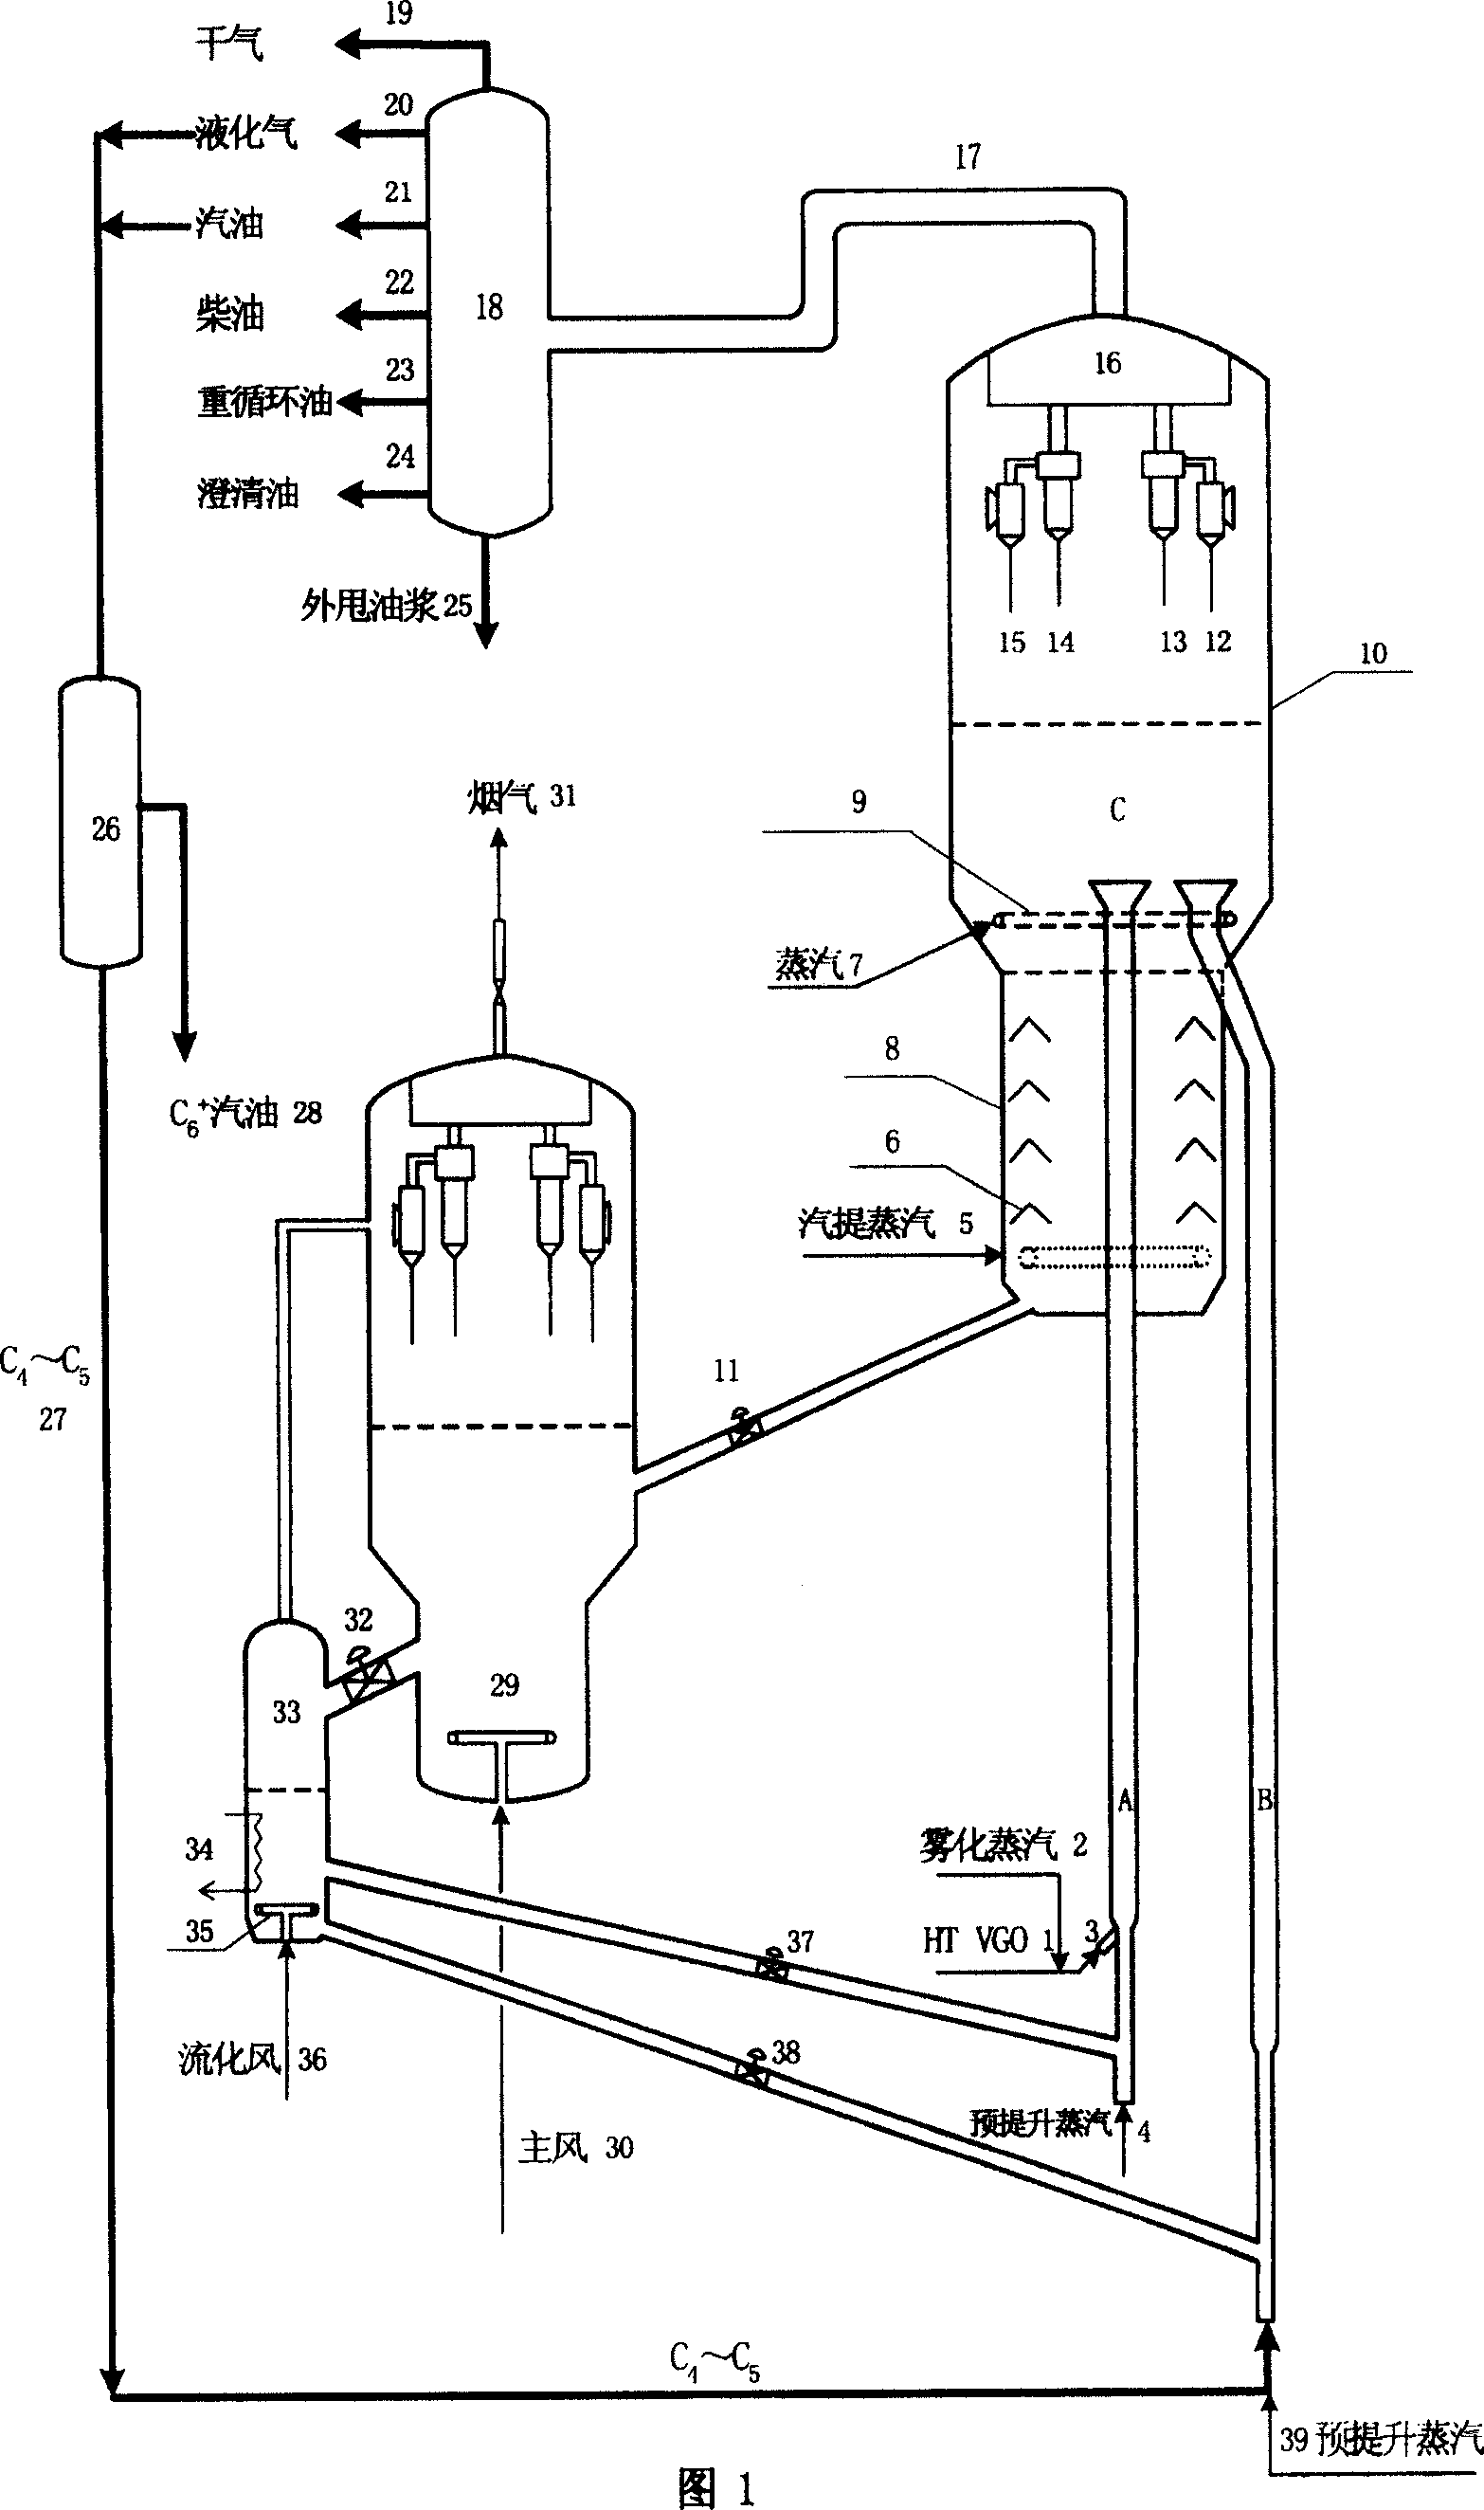 Catalytic conversion process for petroleum hydrocarbons